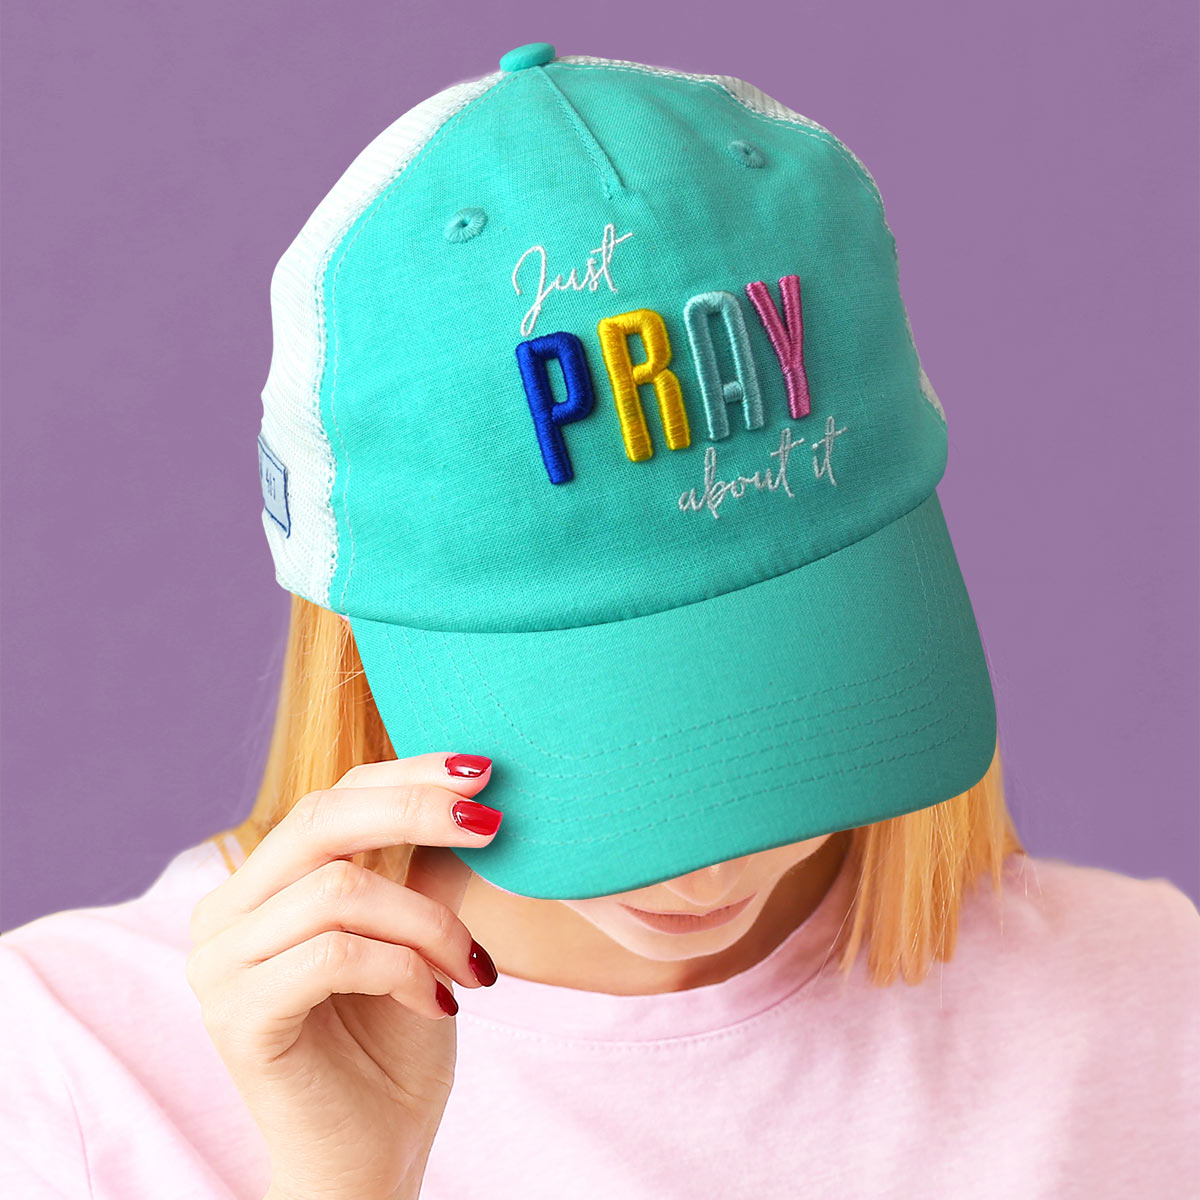 grace & truth Womens Cap Just Pray About It grace & truth® Apparel Hats Hats / Beanies Women's